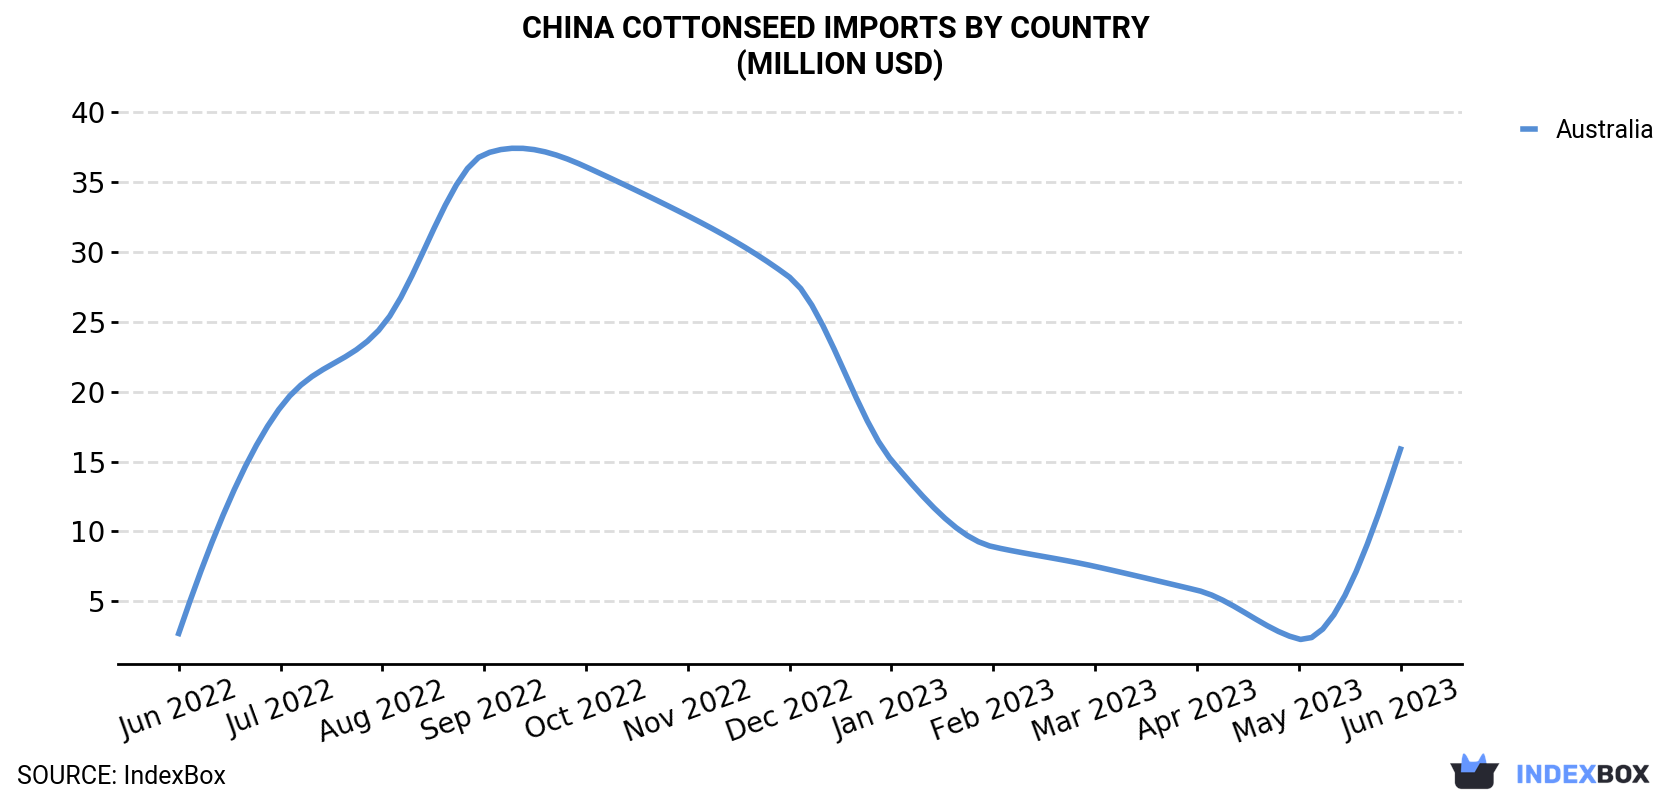 China Cottonseed Imports By Country (Million USD)